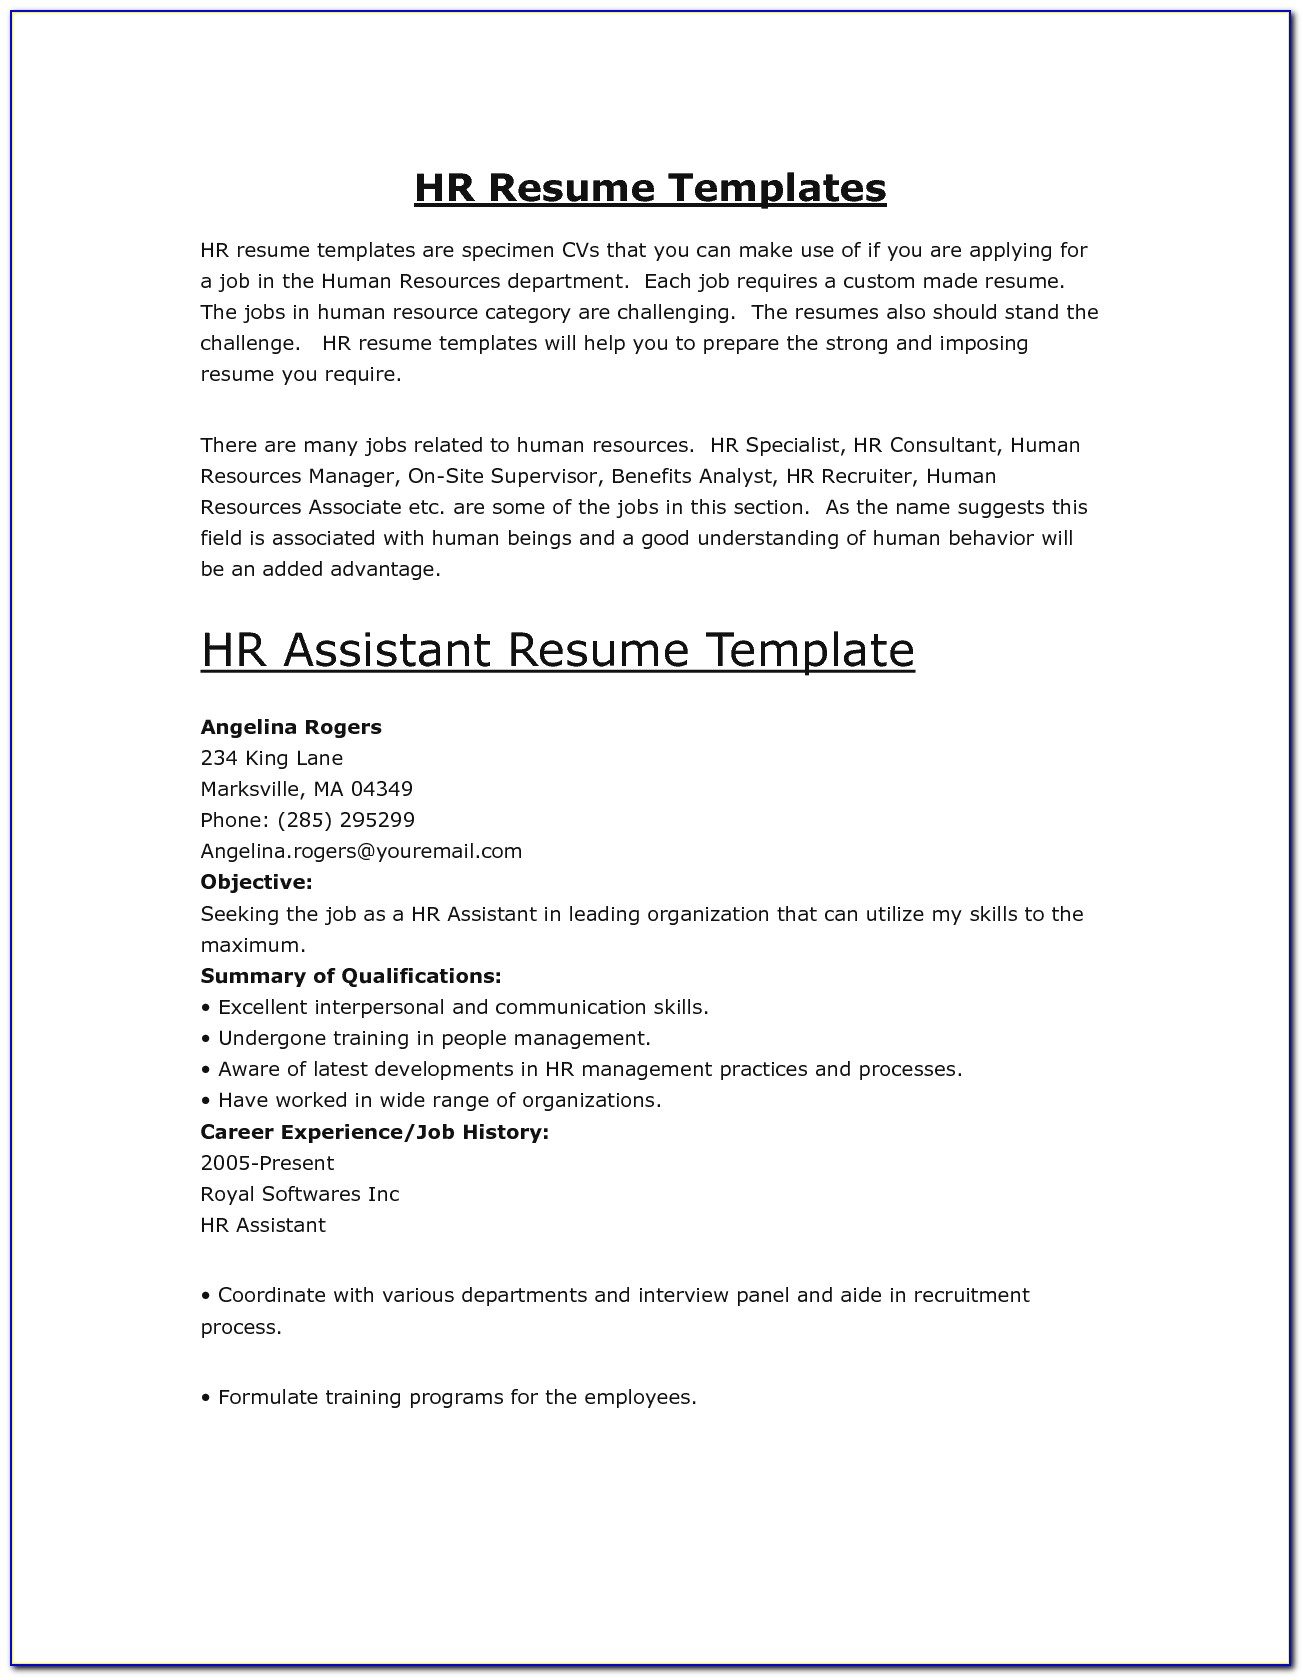 Sample Hr Assistant Resume Human Resources Assistant Resume Sample Human Resources